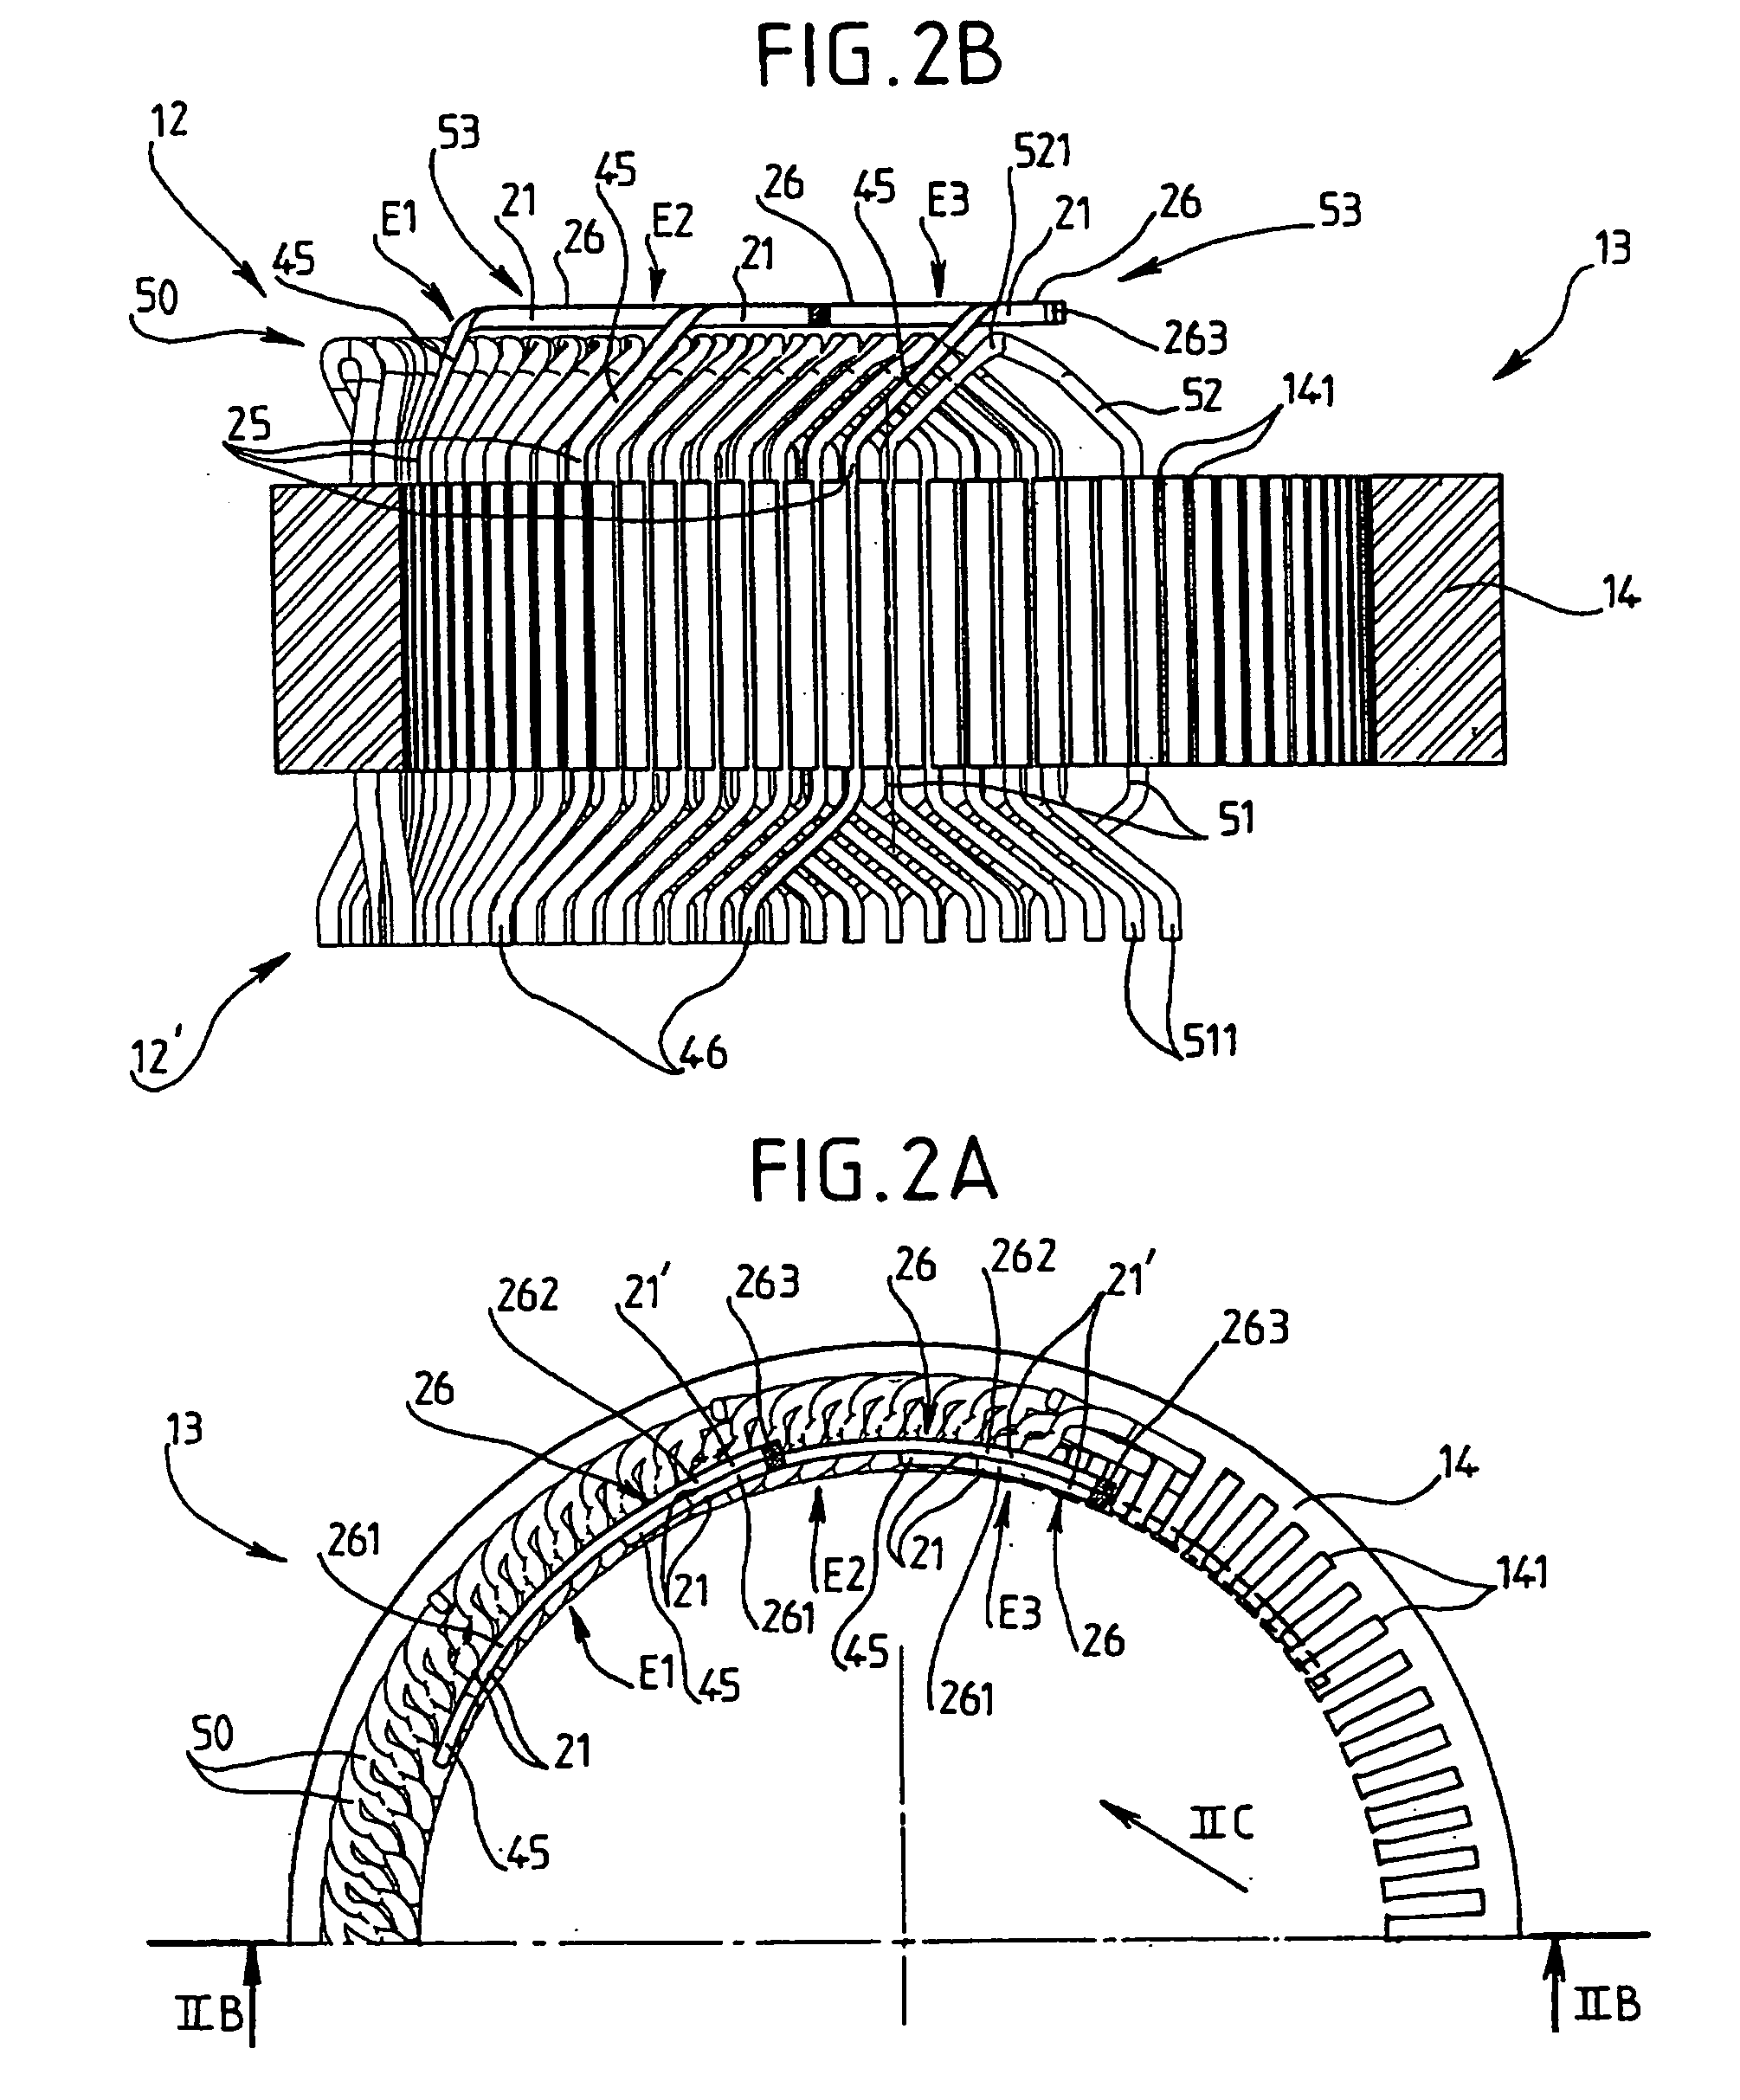 Alternator equipped with stator having twisted inputs